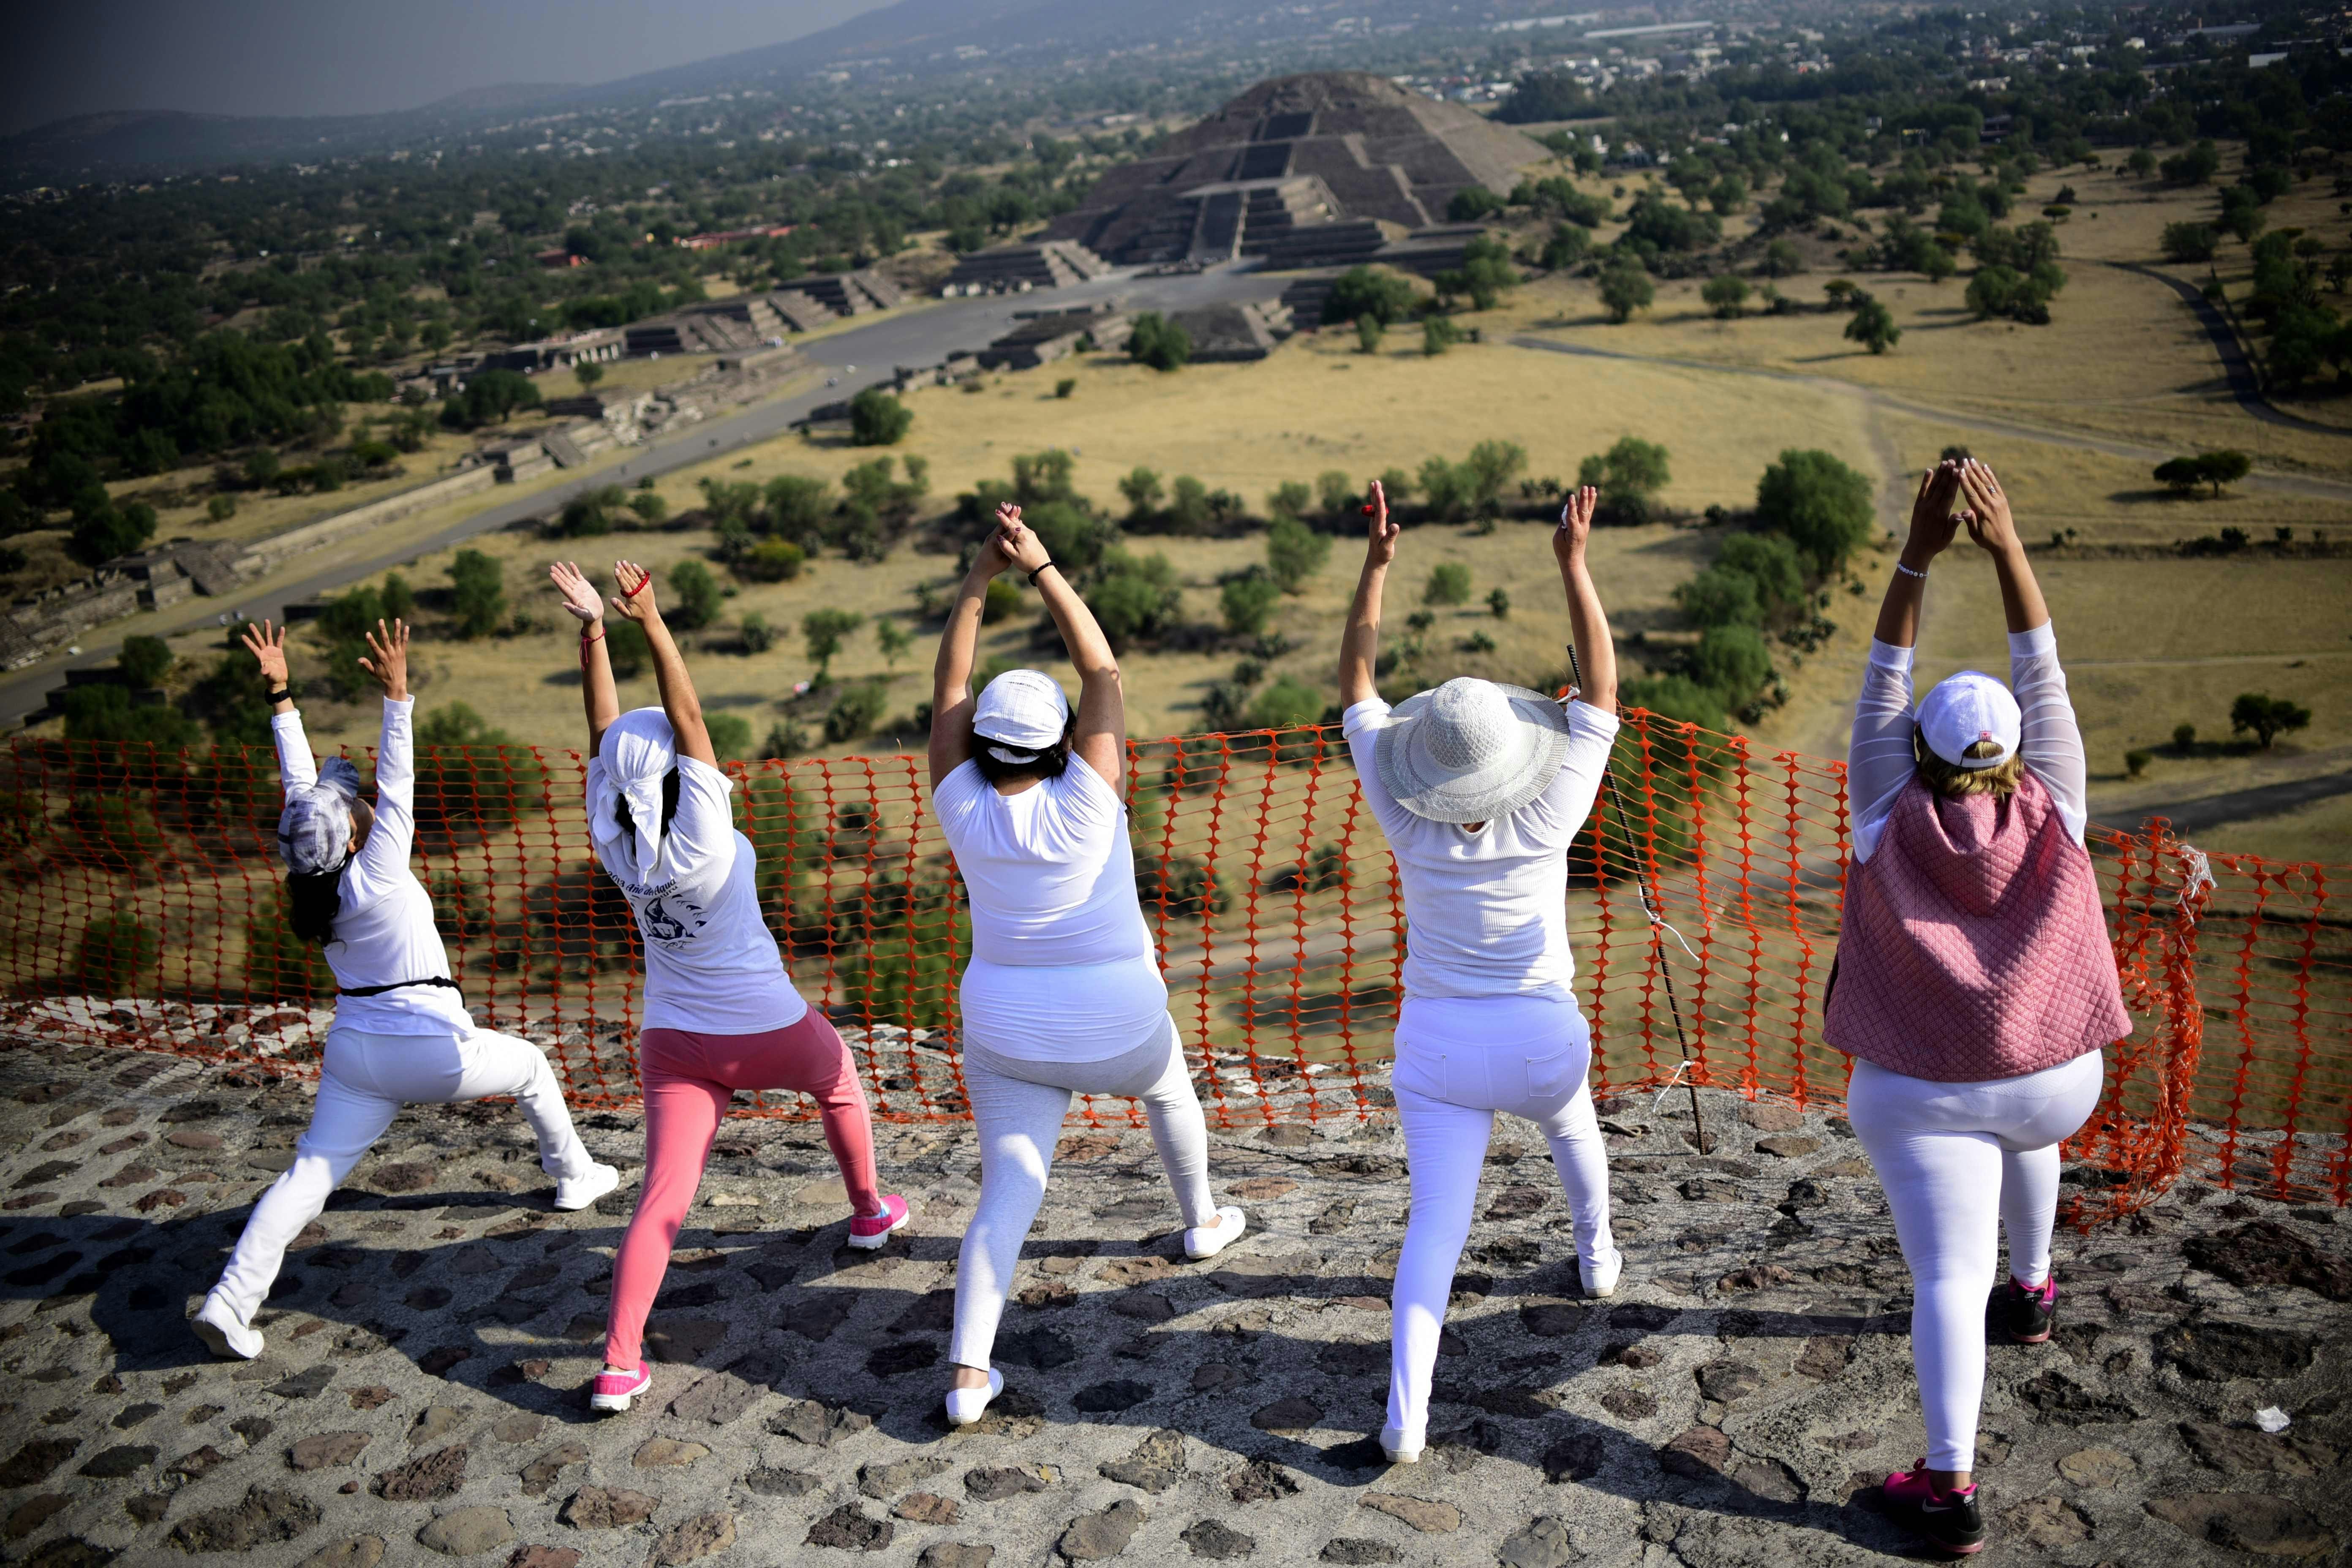 Women atop the Pyramid of the Sun at the archaeological site of Teotihuacan, in the municipality of Teotihuacan, northeast of Mexico City, stretch and "get energy" from the sun as it rises during celebrations of the spring equinox